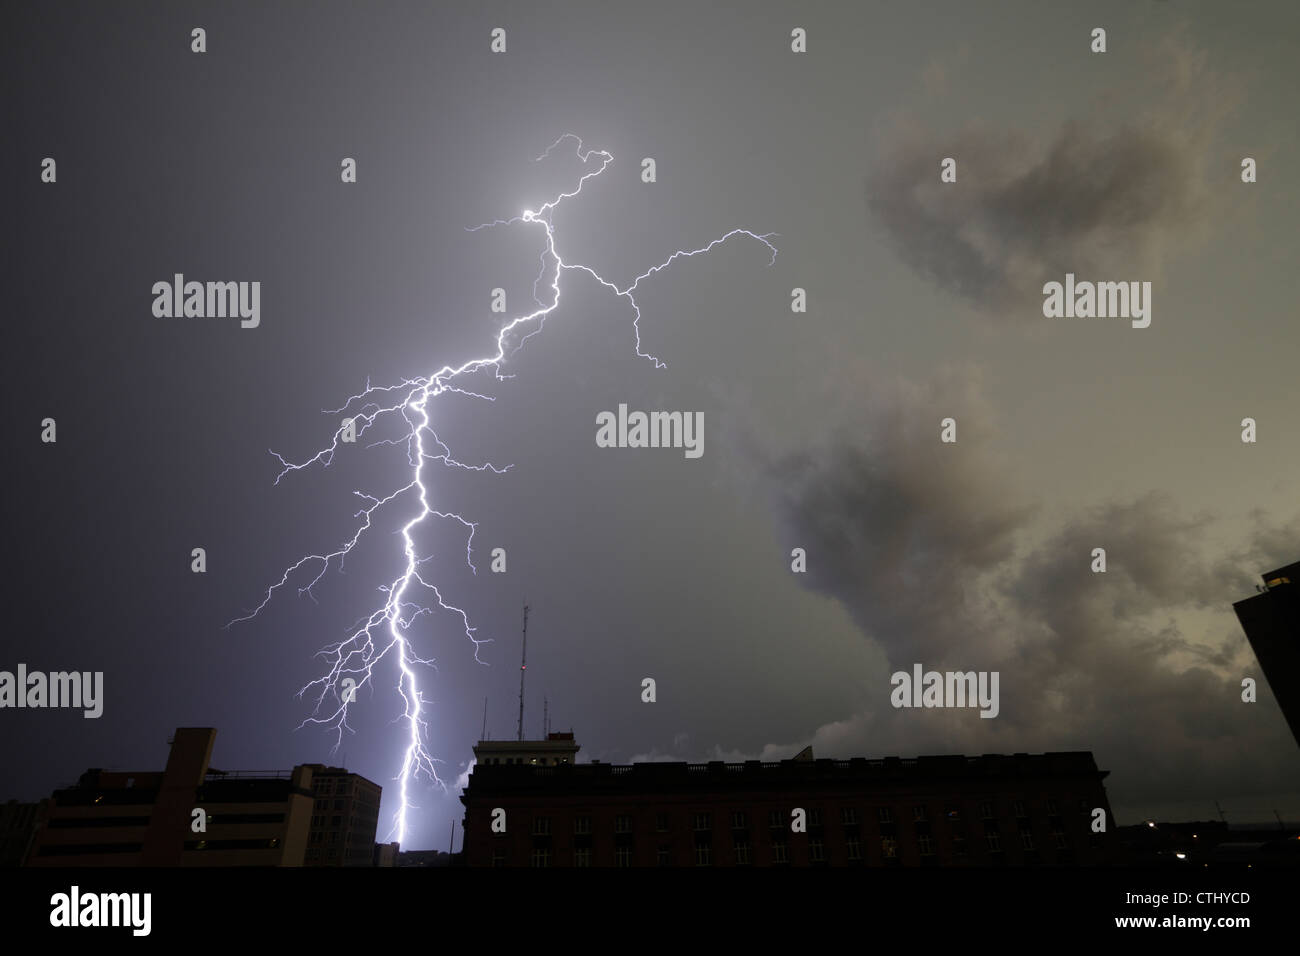 Extremely detailed lightning strike over a city. Stock Photo